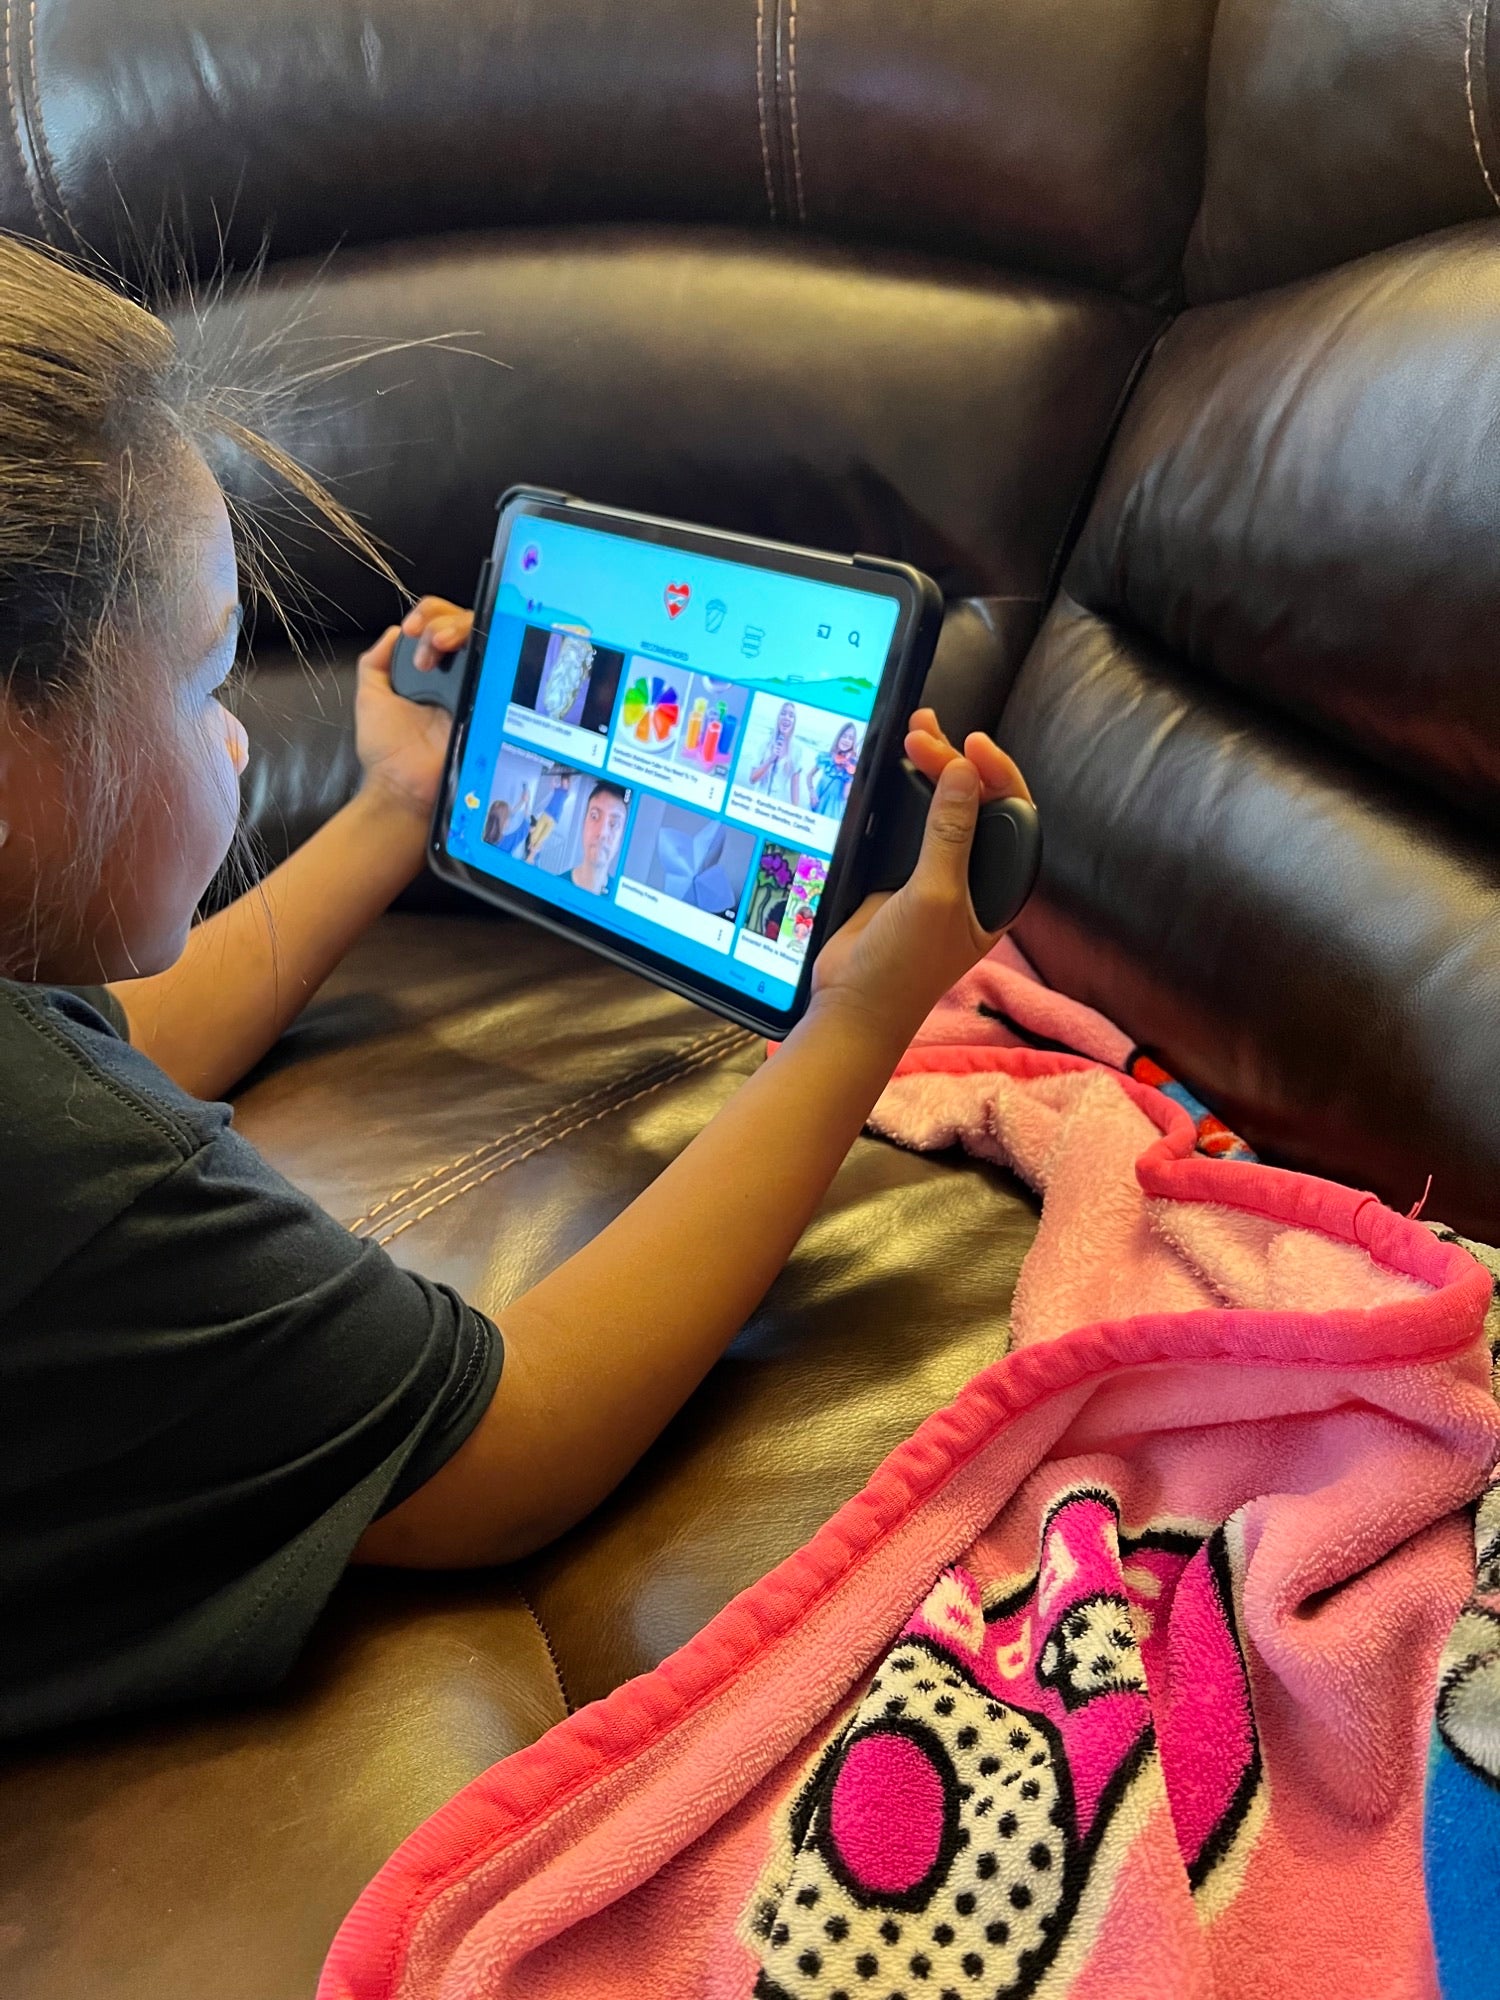 Childproofing Your iPad: Safety Measures for Kids